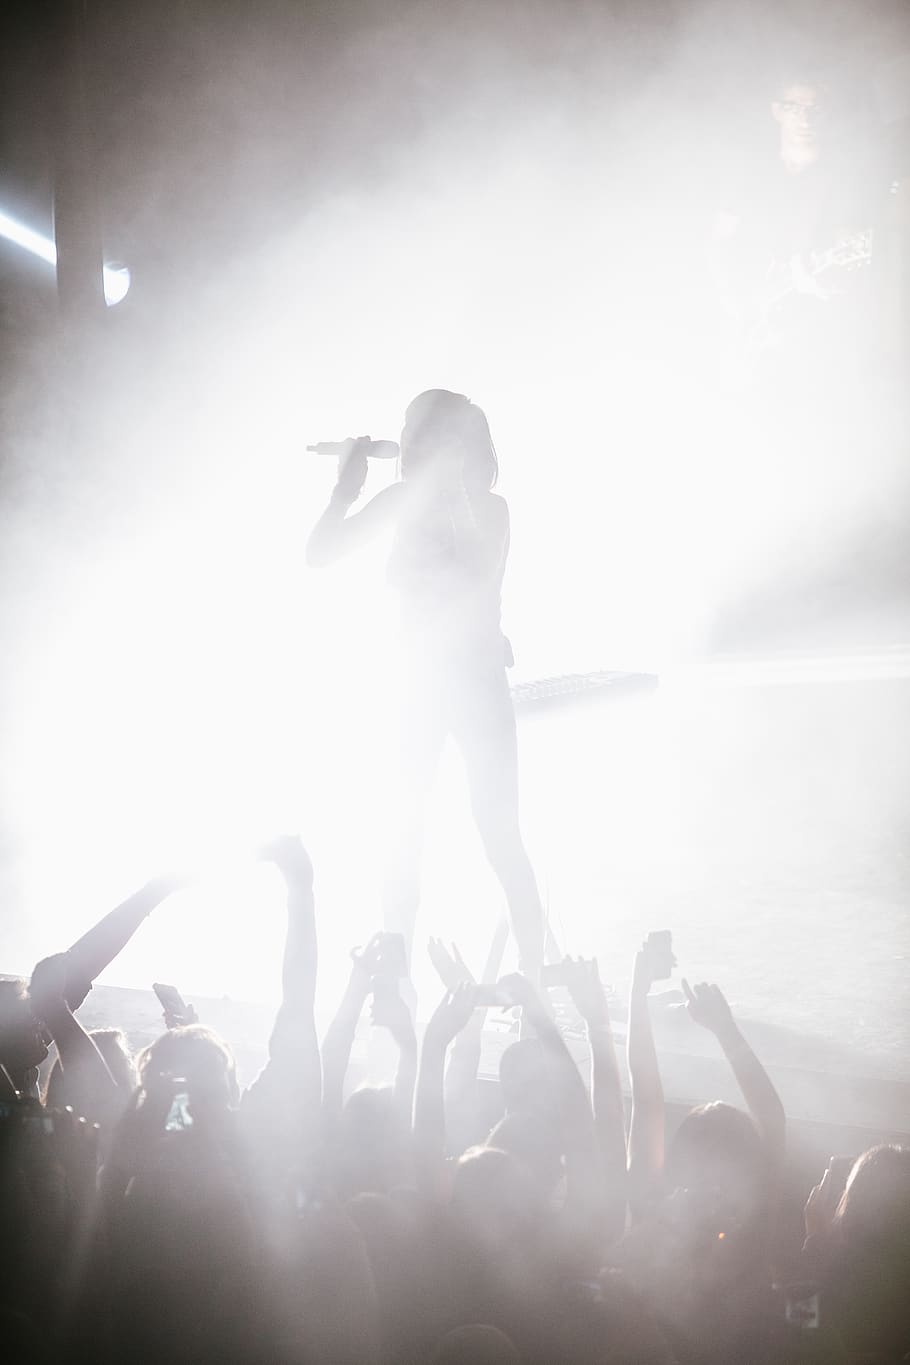 Hd Wallpaper United States Santa Ana The Observatory People Action Phantogram Wallpaper Flare